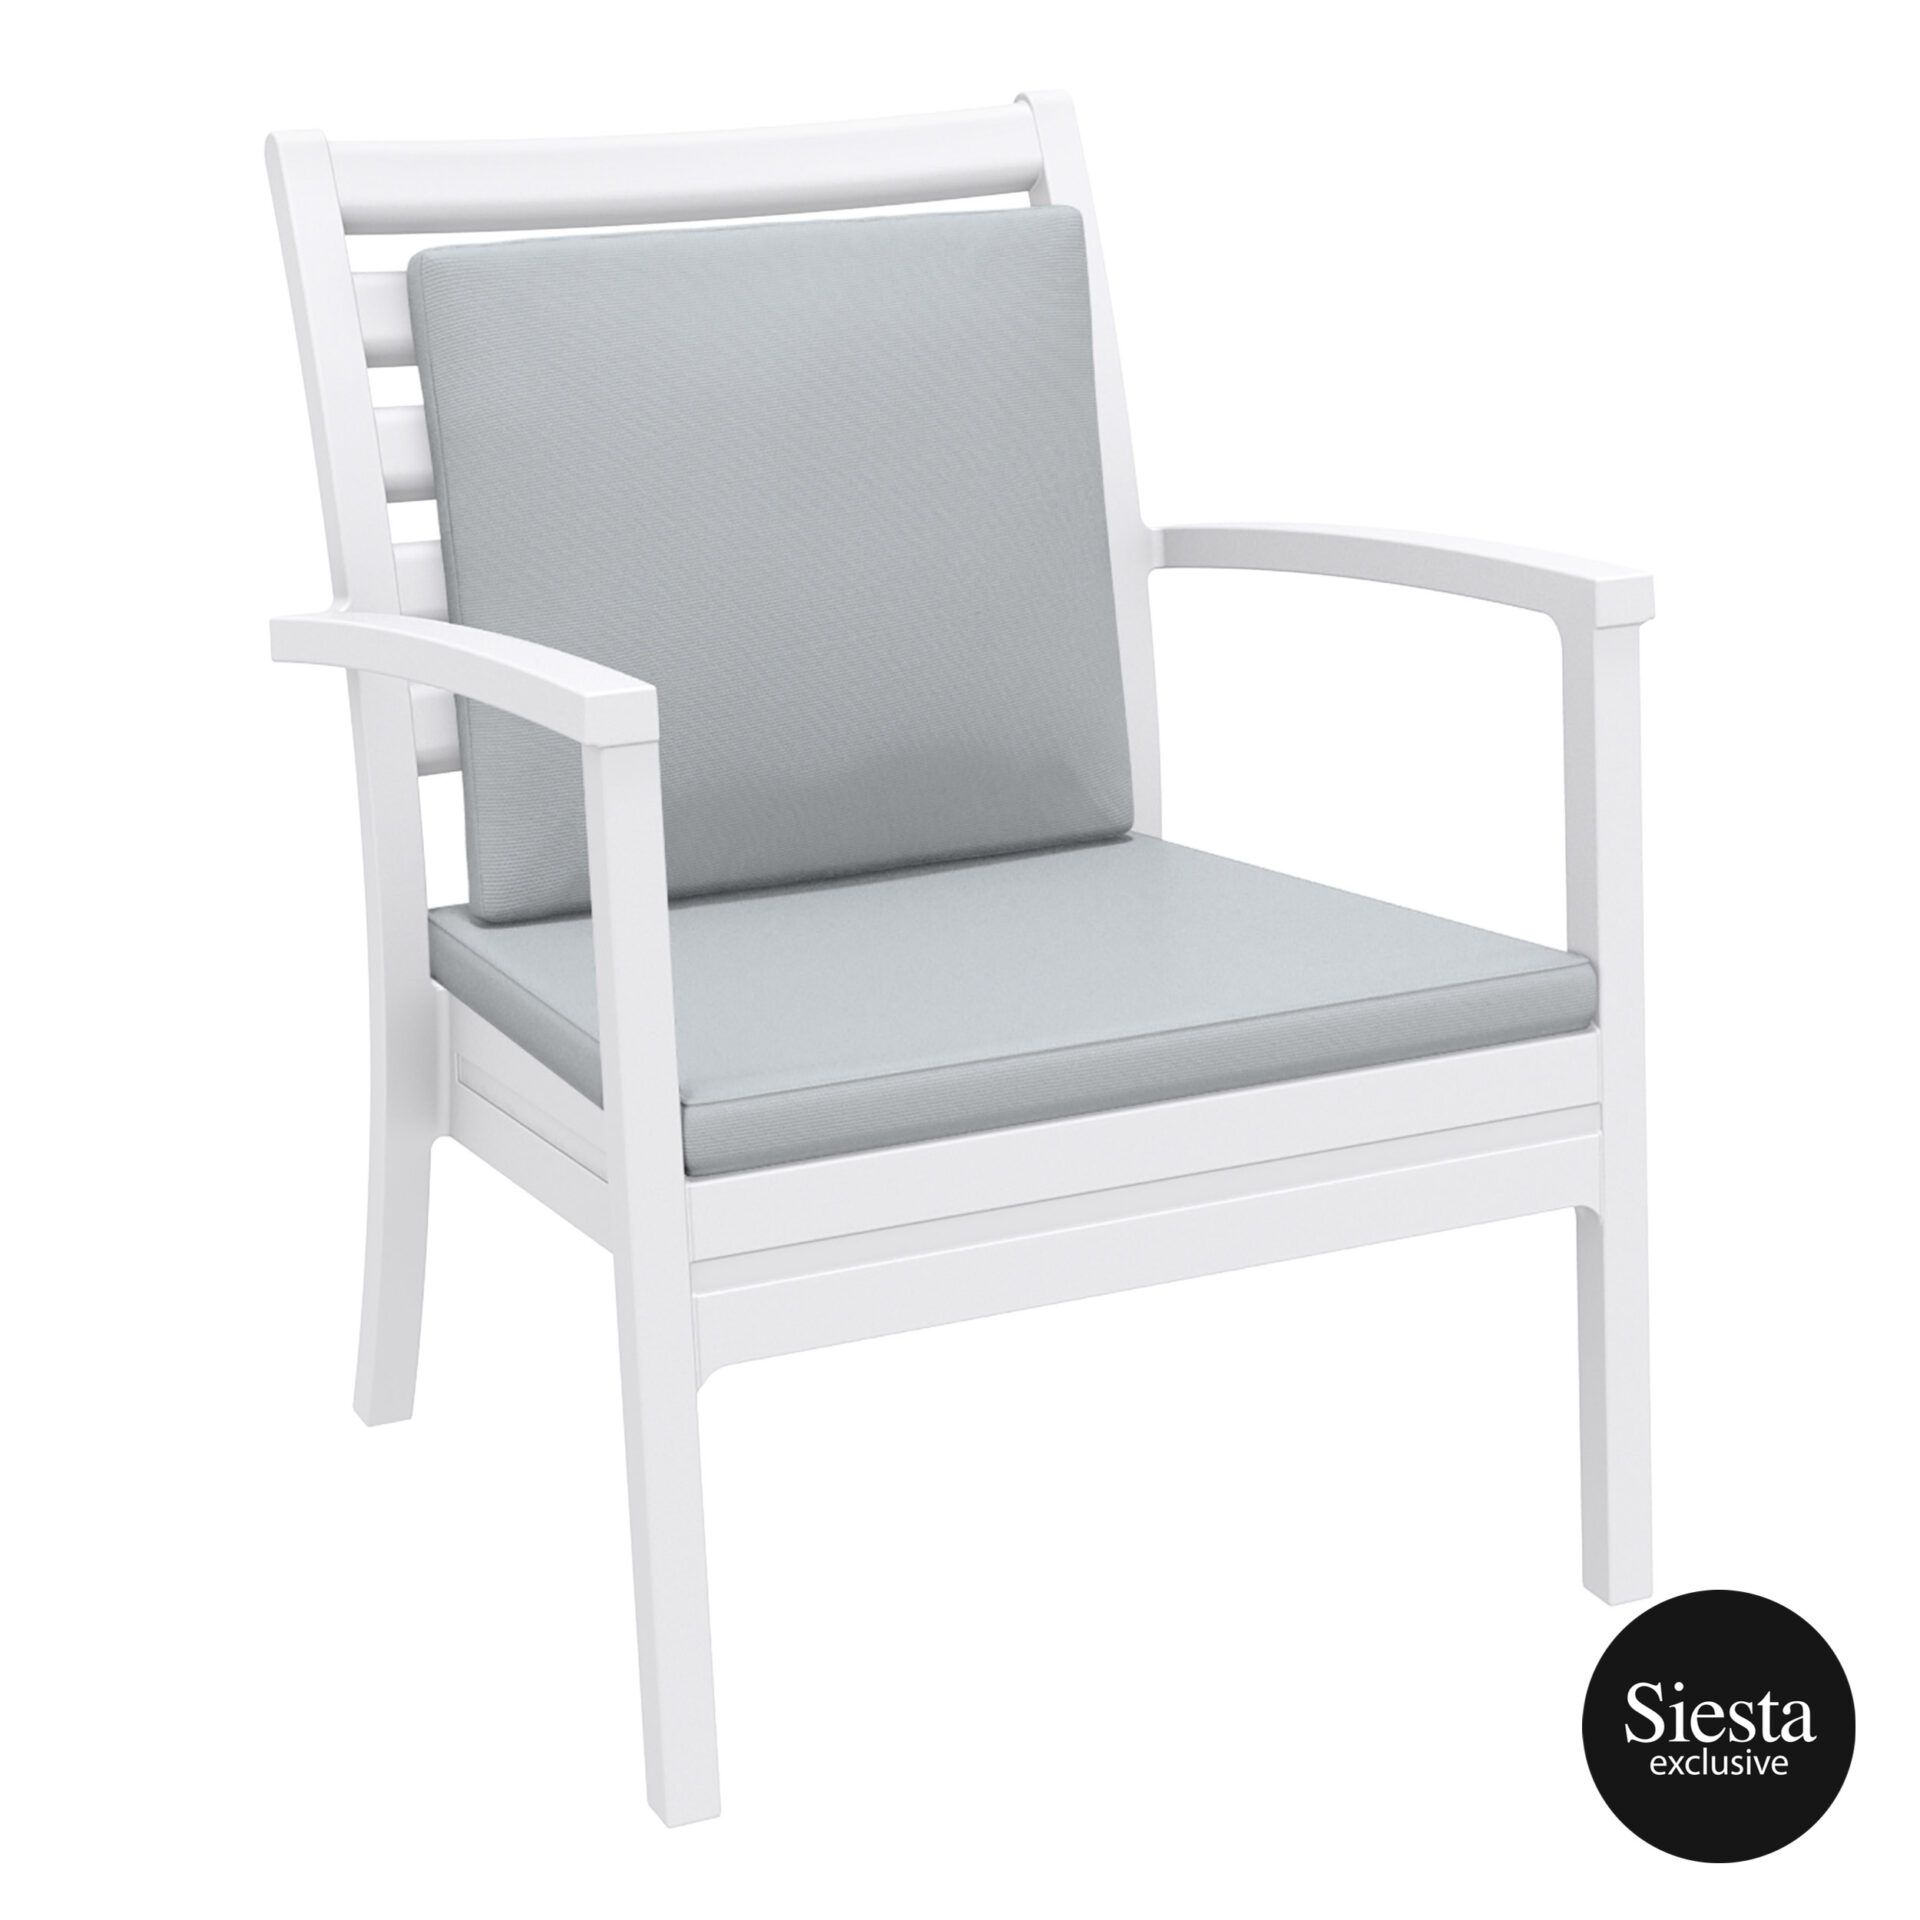 Artemis XL Armchair - White with Light Grey Seat and Back Cushion